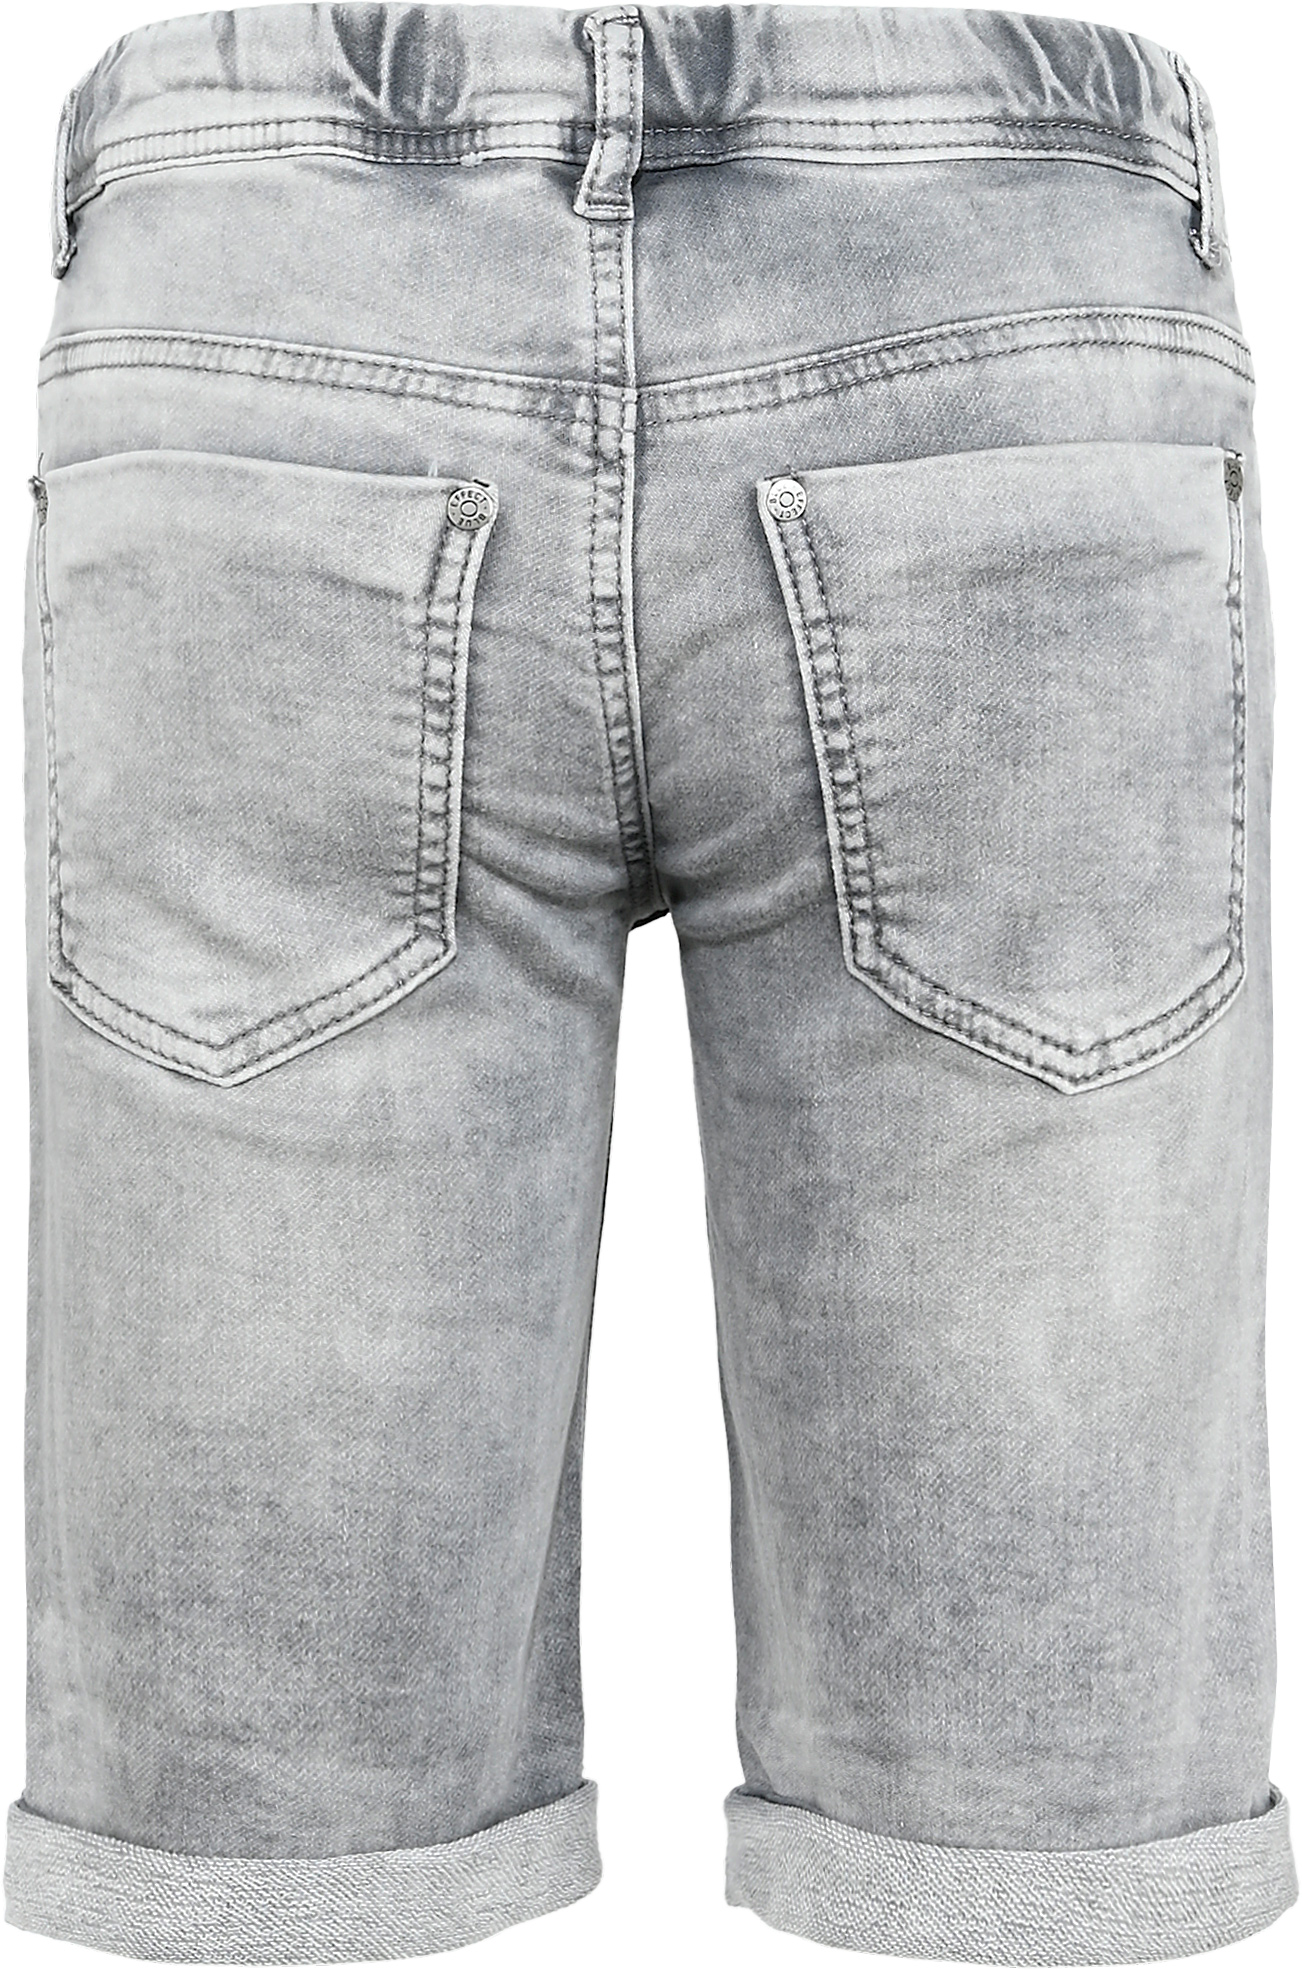 4831-Boys Jogg Short Sweat Denim, available in Normal